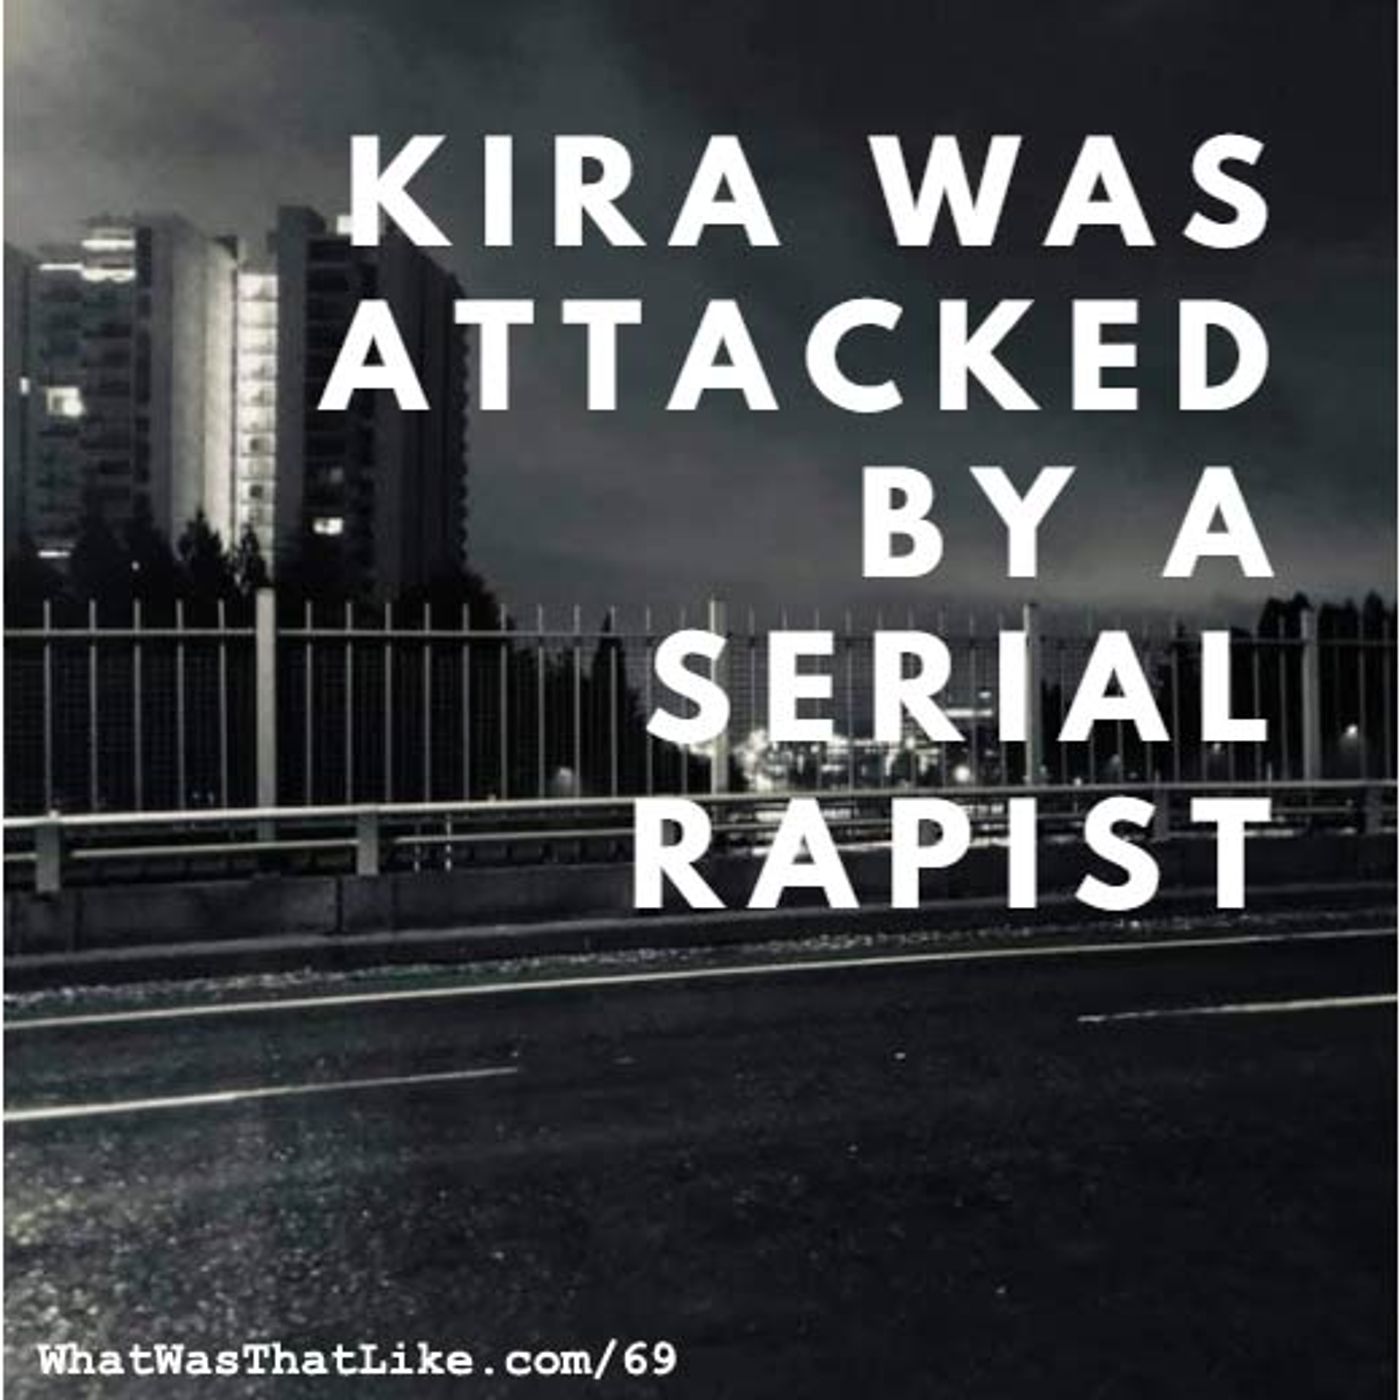 Kira was attacked by a serial rapist by What Was That Like